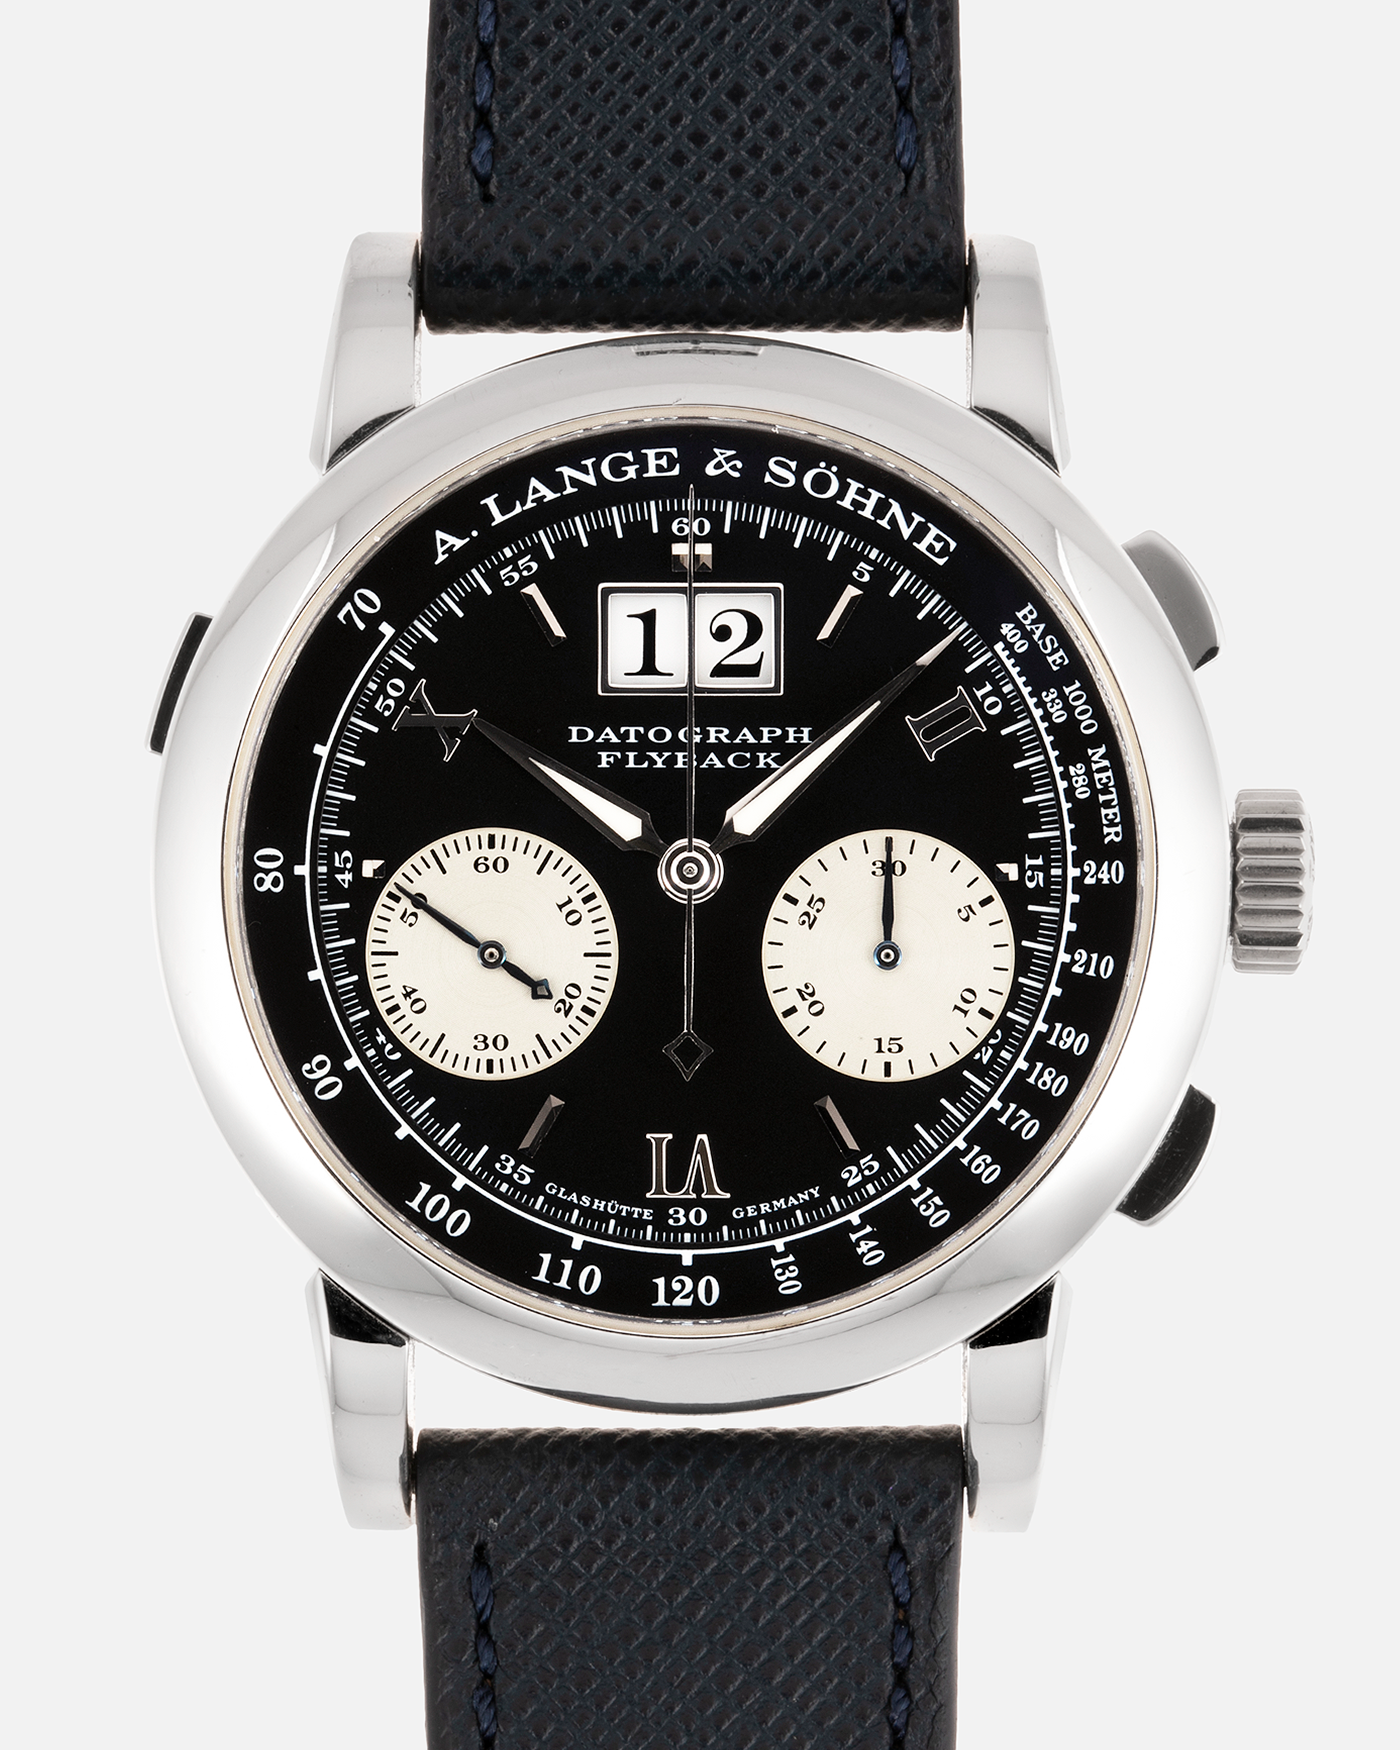 Brand: A. Lange & Sohne Year: 2000’s Model: Datograph Reference Number: 403.035 Material: Platinum Movement: Manual Winding L951.1 Case Diameter: 39mm Bracelet/Strap: Molequin Navy Textured Calf and A. Lange & Sohne Platinum Tang Buckle